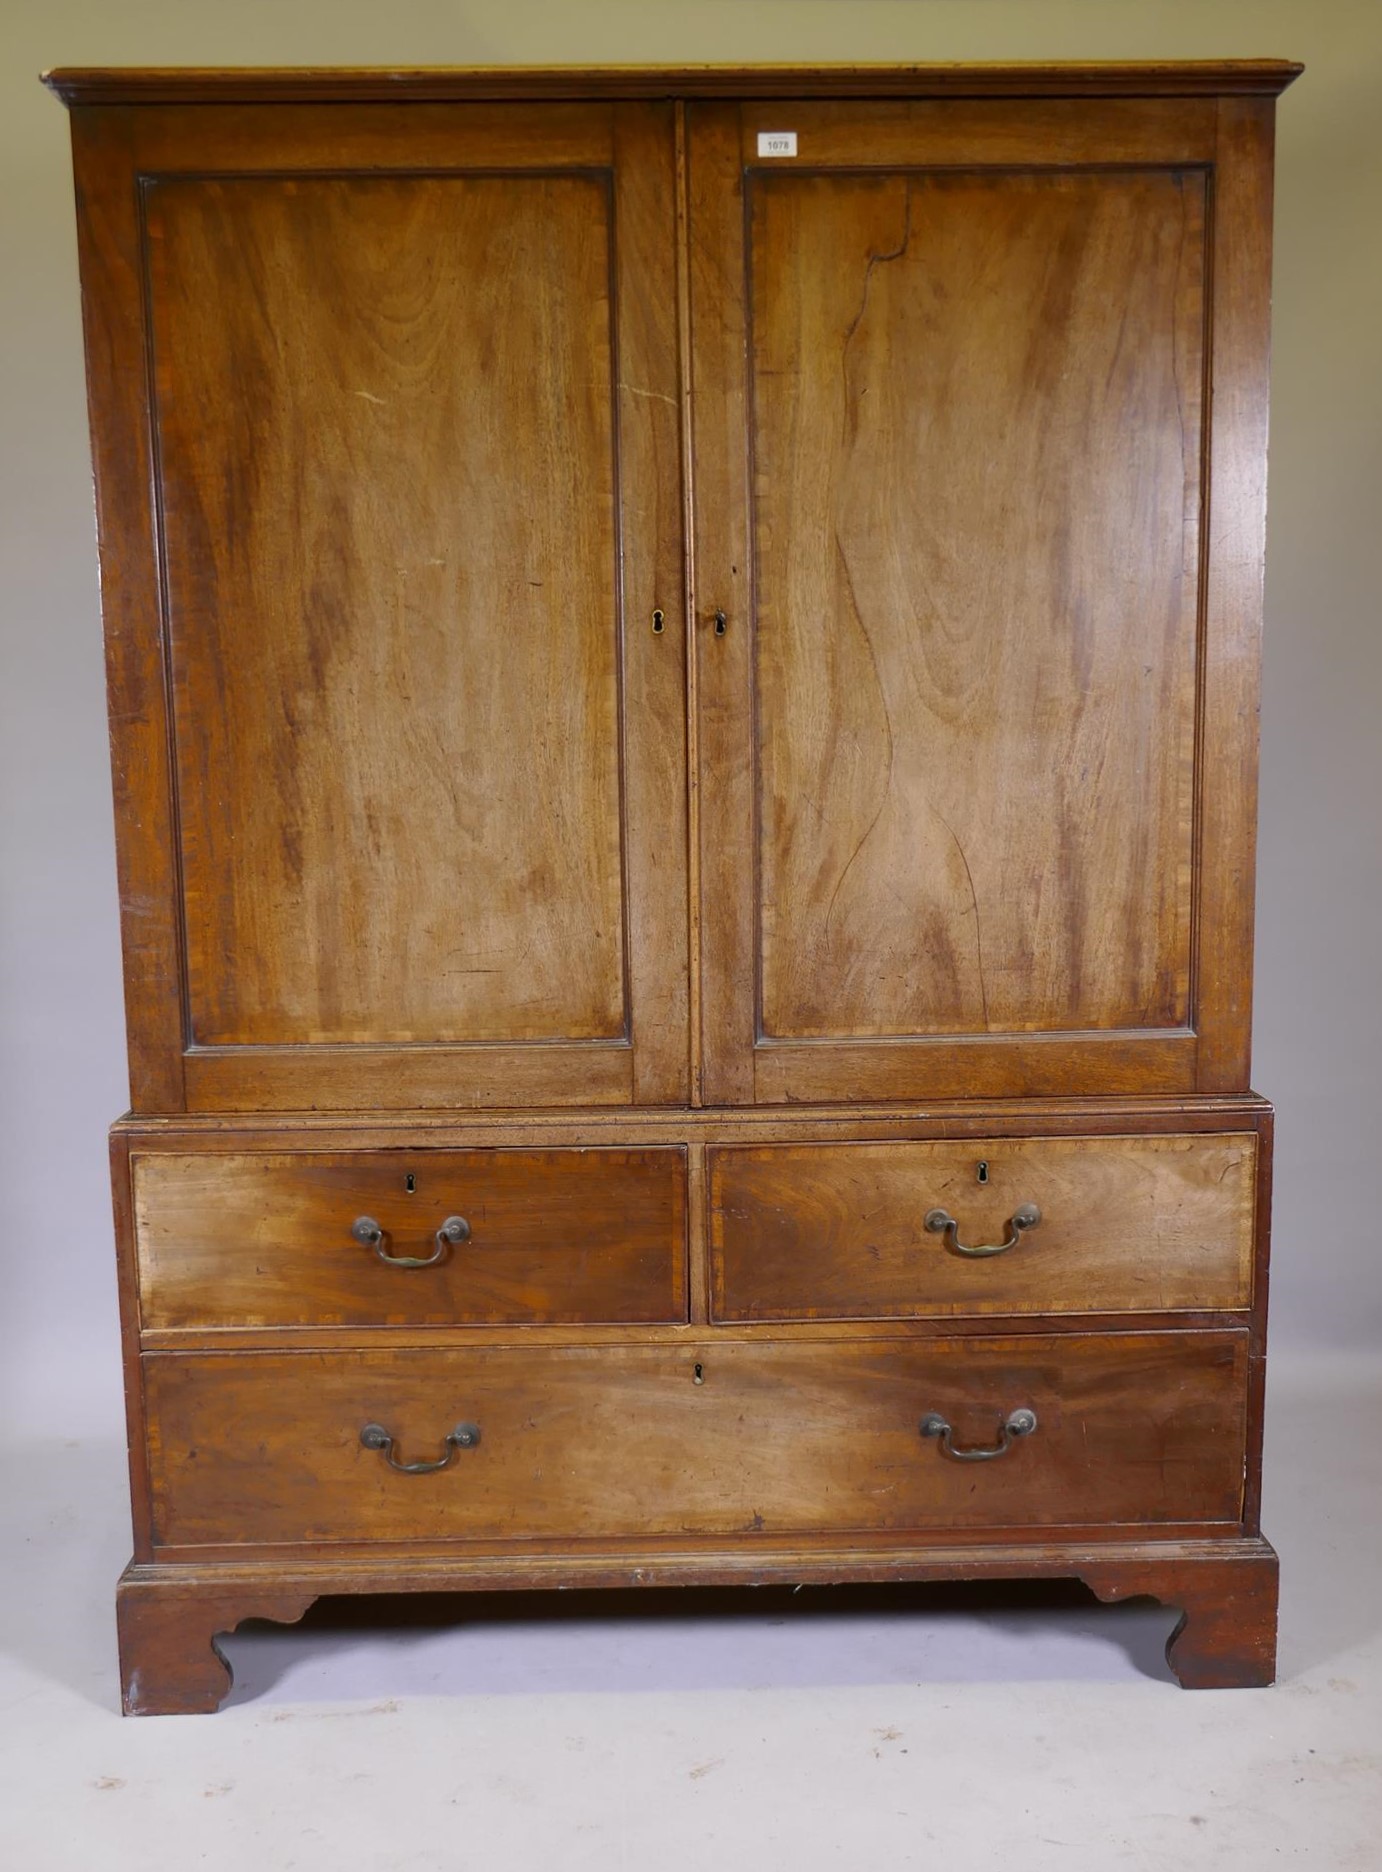 A George III mahogany linen press of small proportions, the doors and drawers with crossbanded inlay